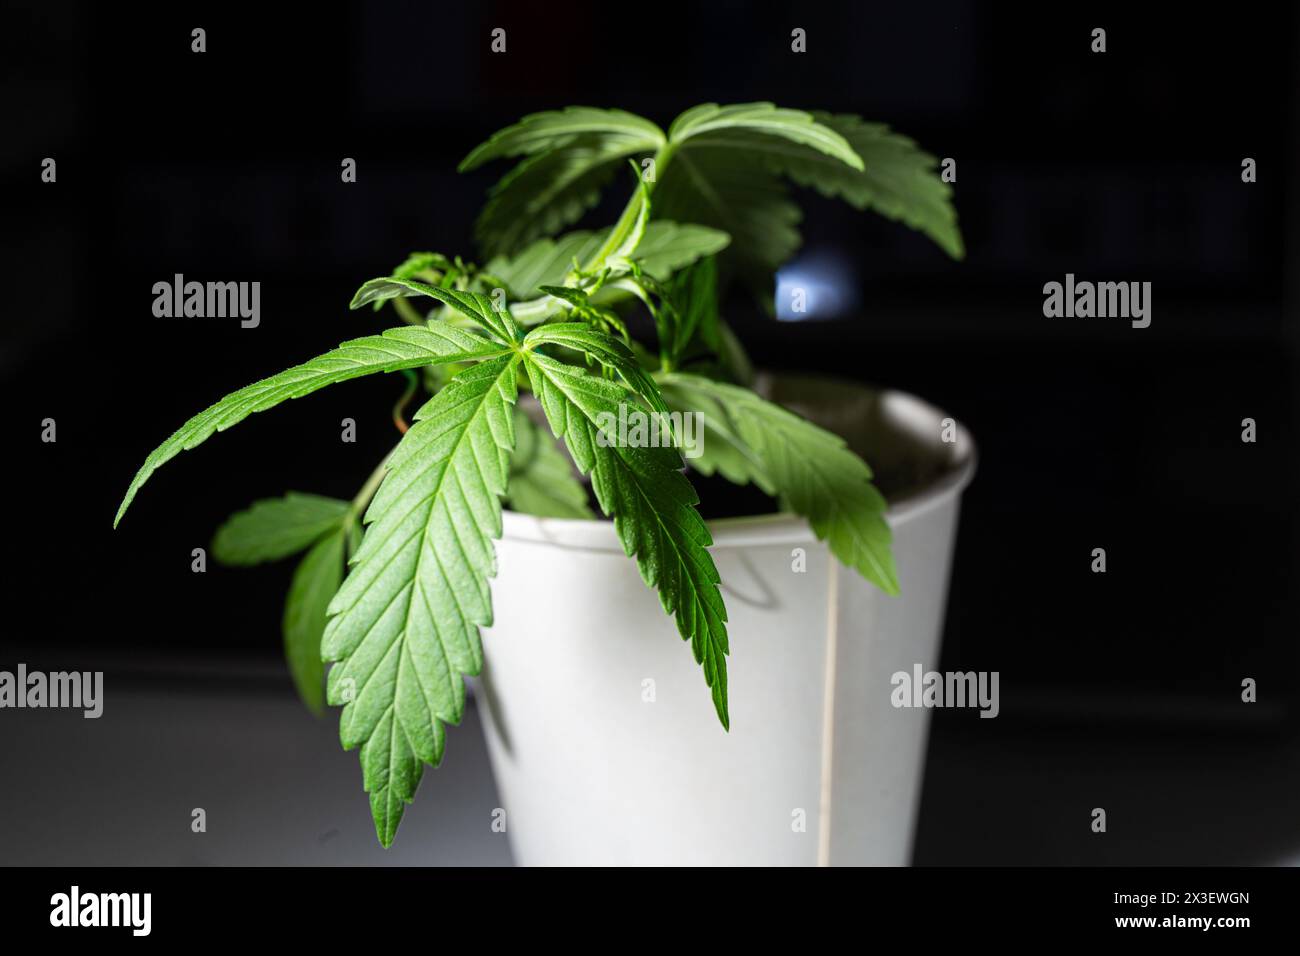 A single cannabis plant isolated on a black background. The plant is in a white plastic pot and has several green leaves. Stock Photo